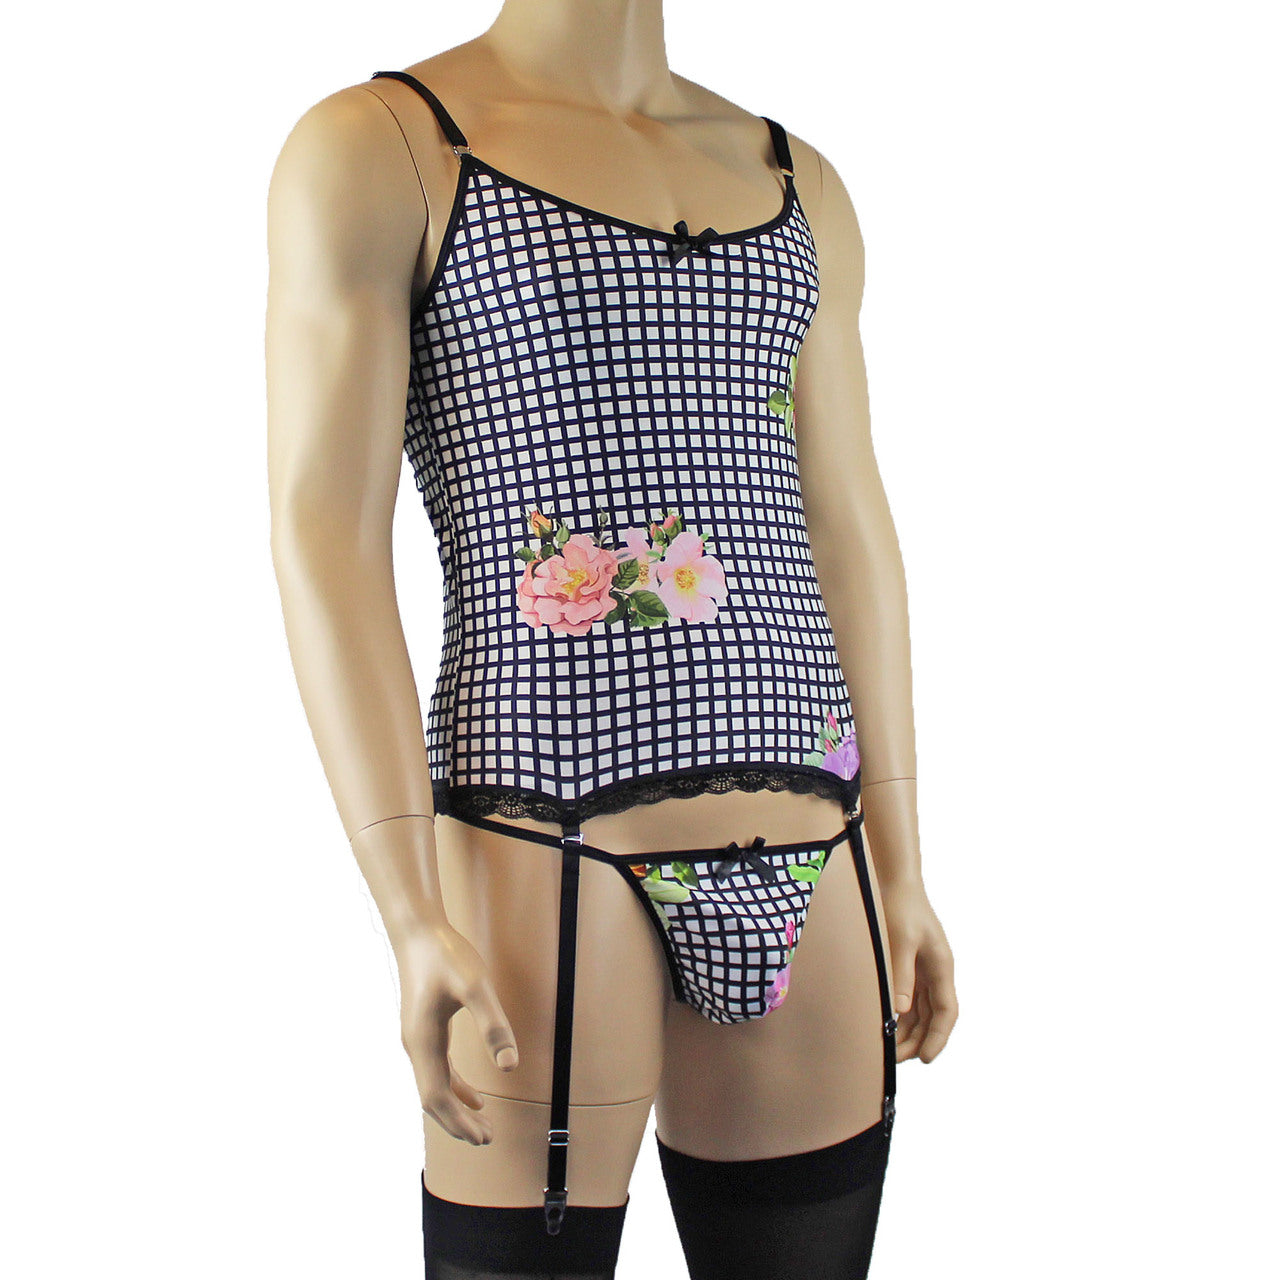 Mens Diana Camisole Corset Top & G string in a Pretty Flower Checkered Spandex